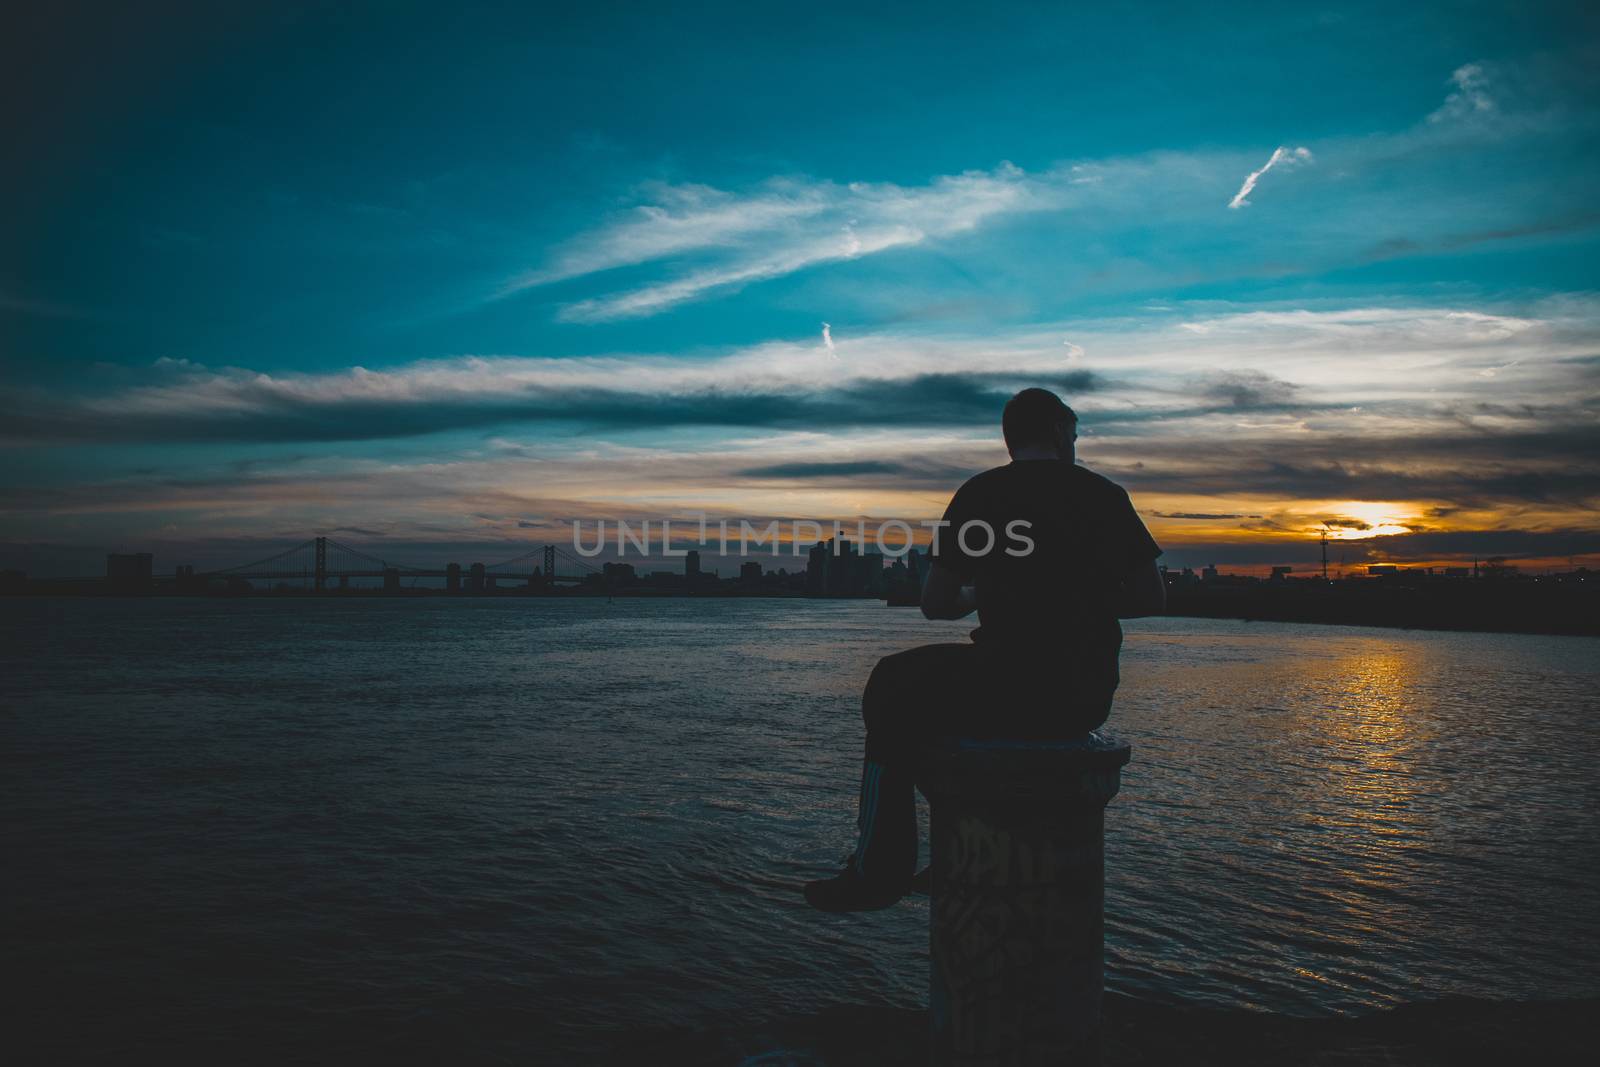 A Silhouette of a Man Sitting on a Pole at Graffiti Pier With a  by bju12290